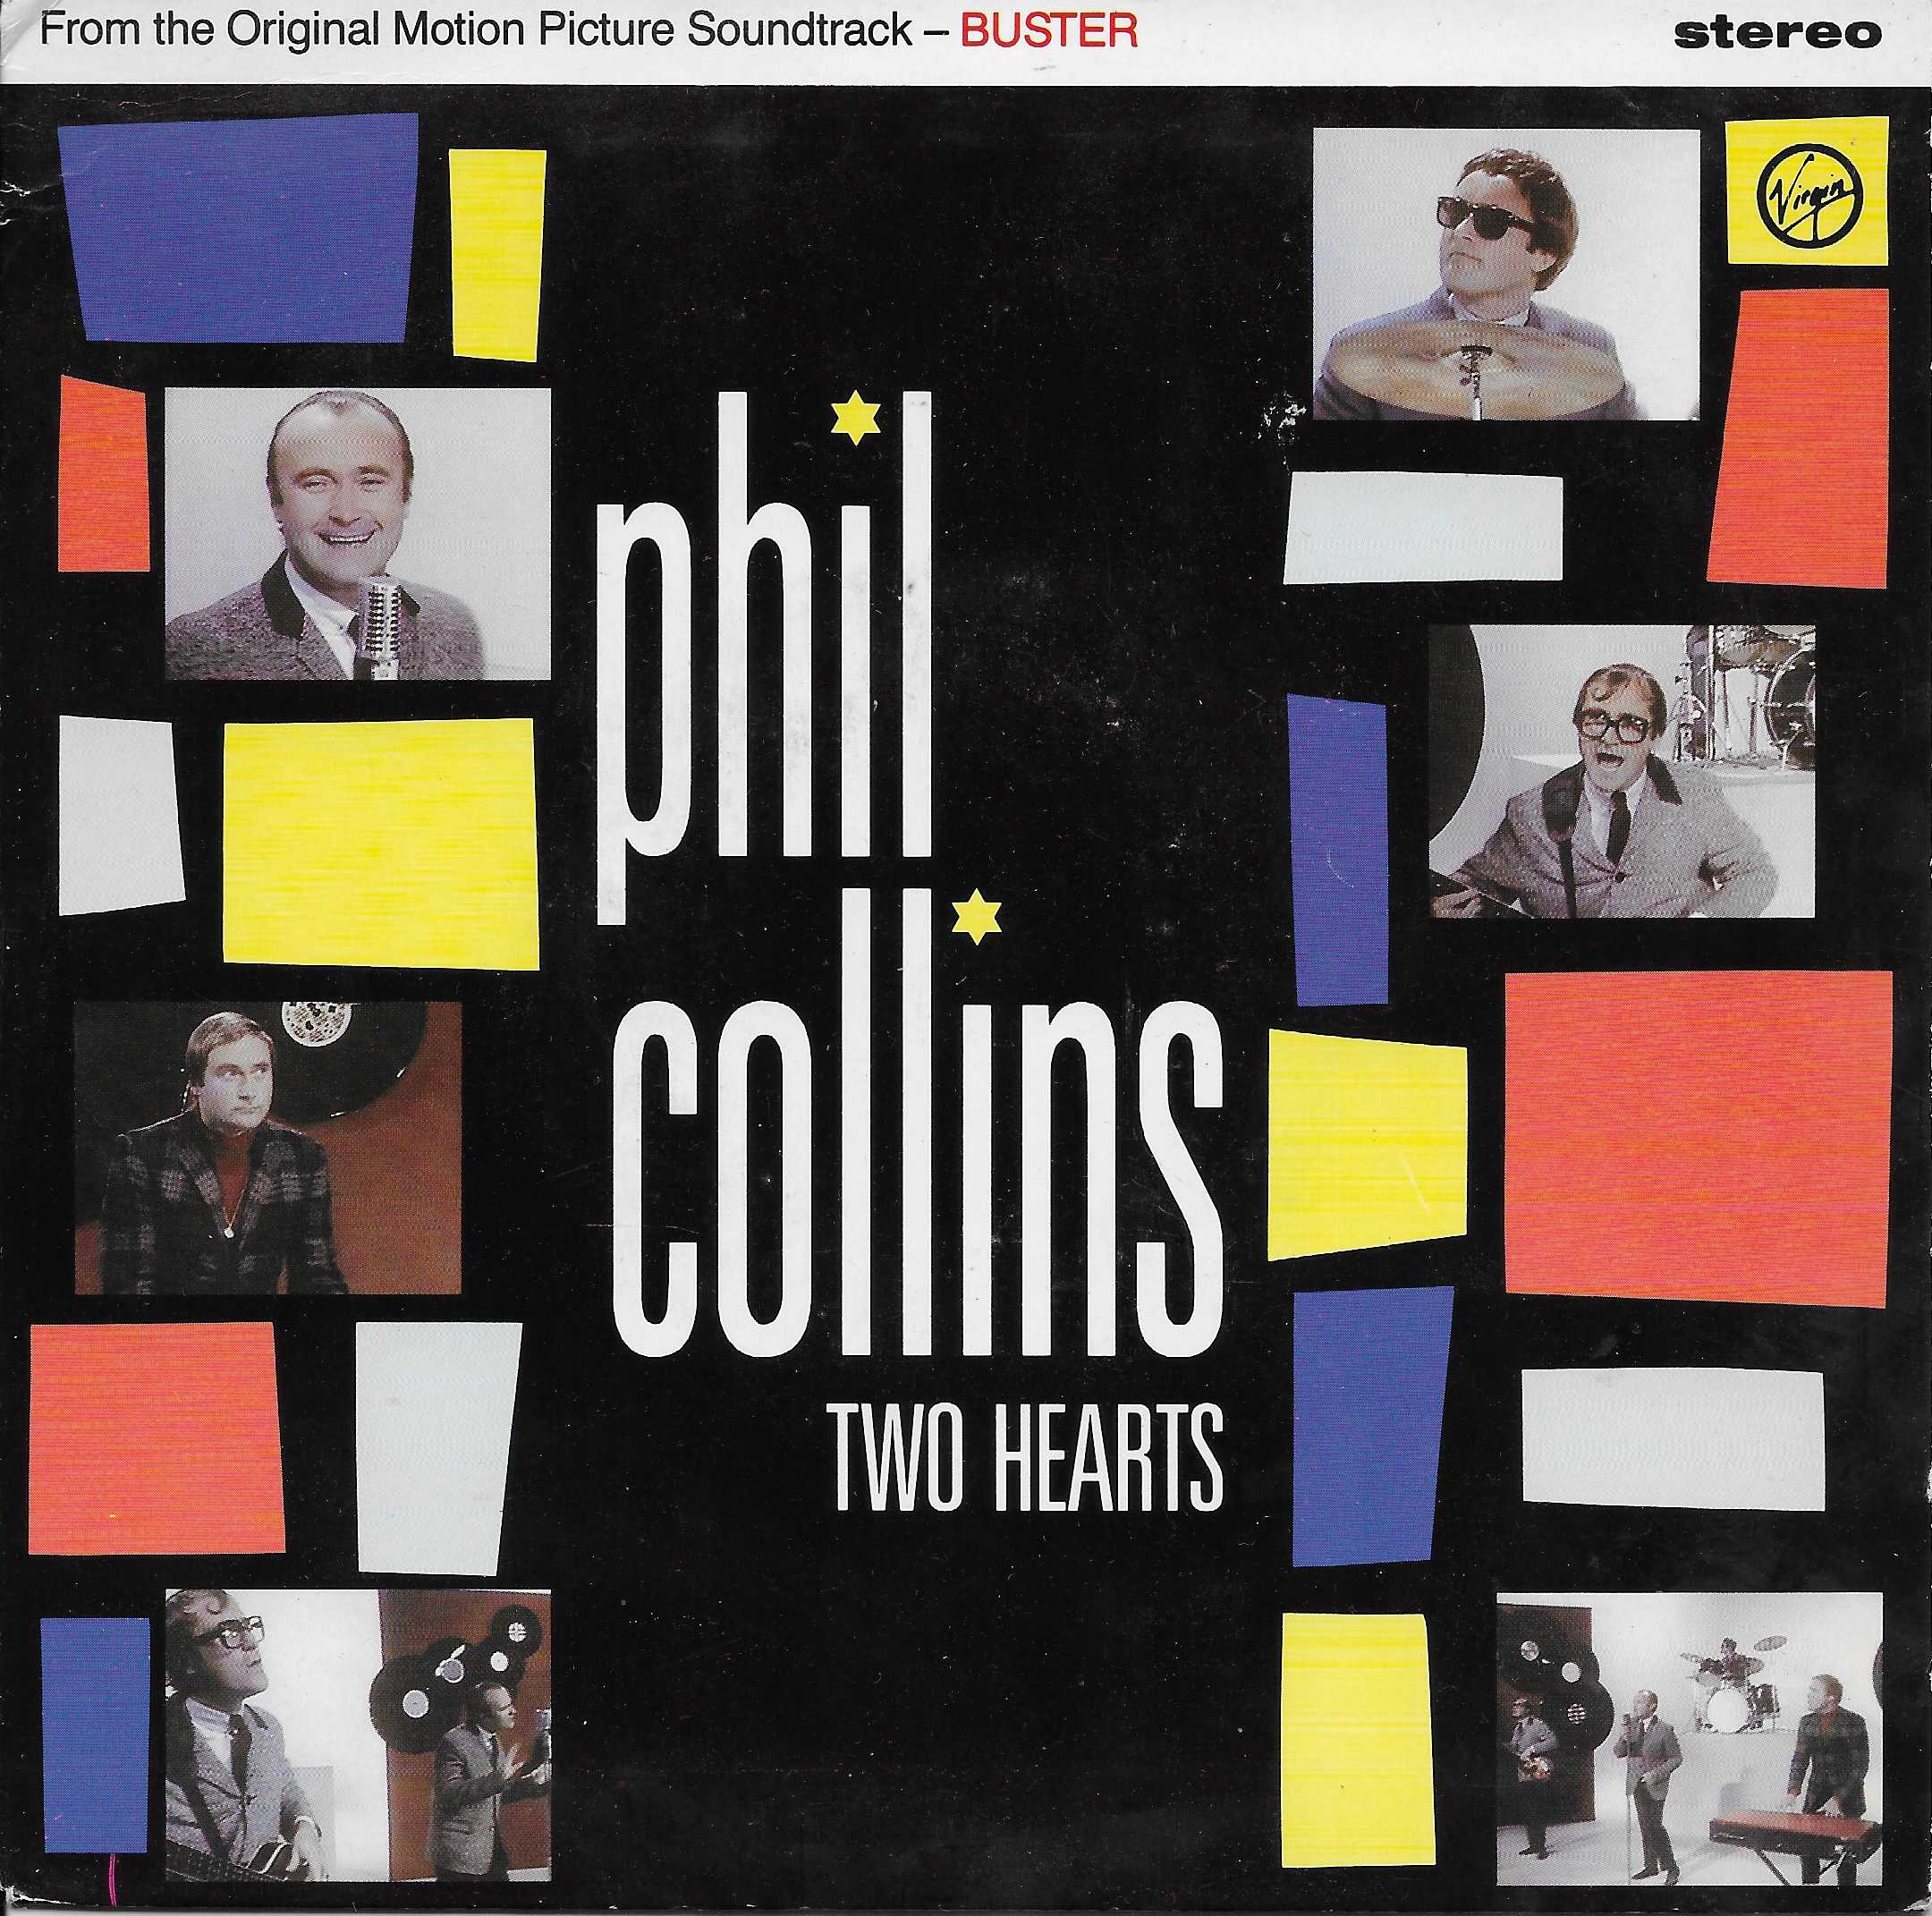 Picture of Two hearts (Buster) by artist Phil Collins from ITV, Channel 4 and Channel 5 singles library